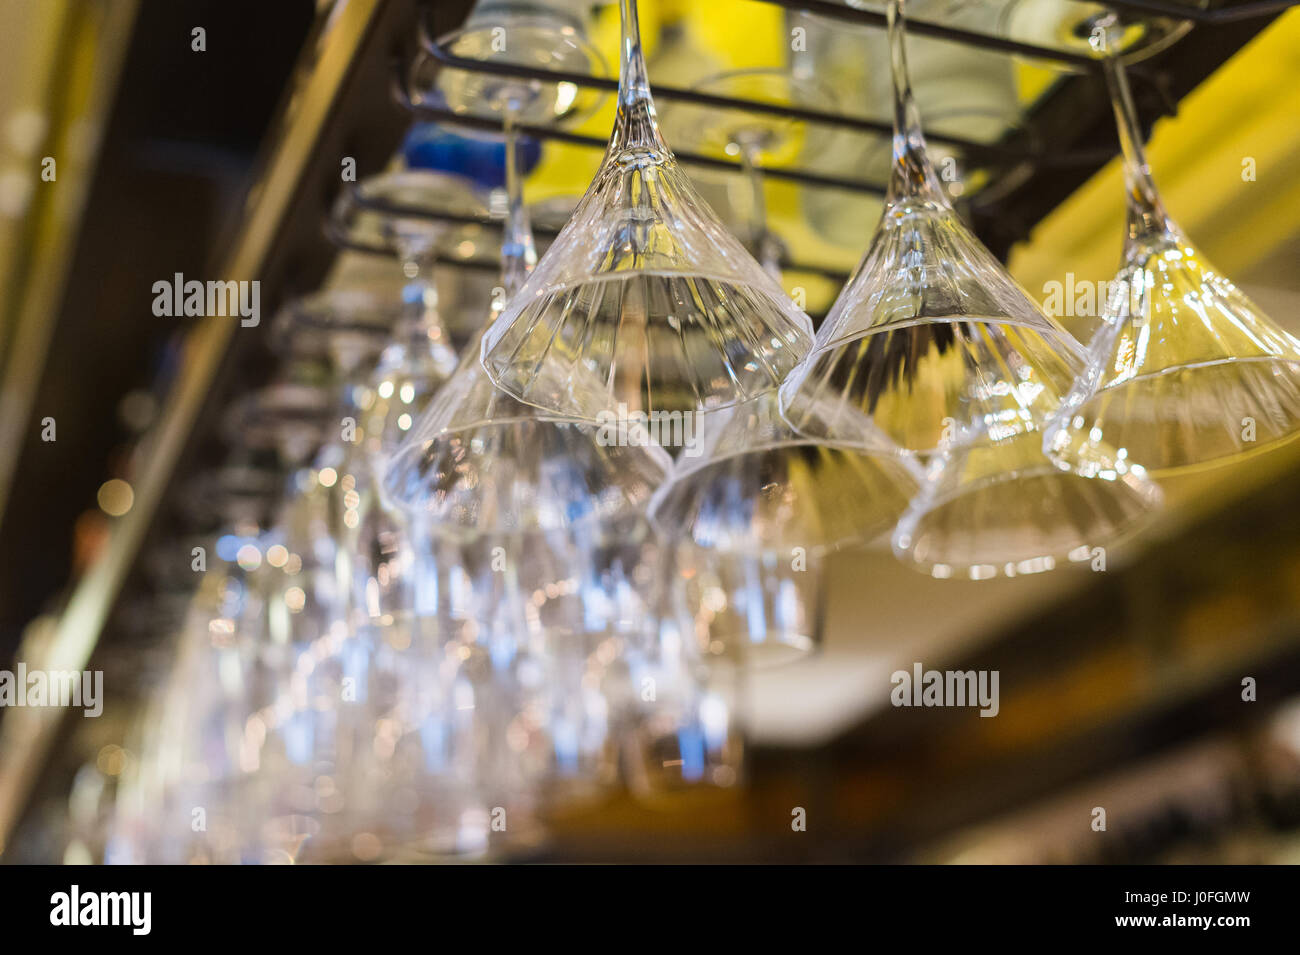 Cocktail Glasses Hanging Upside Down in a Restaurant Bar Stock Photo